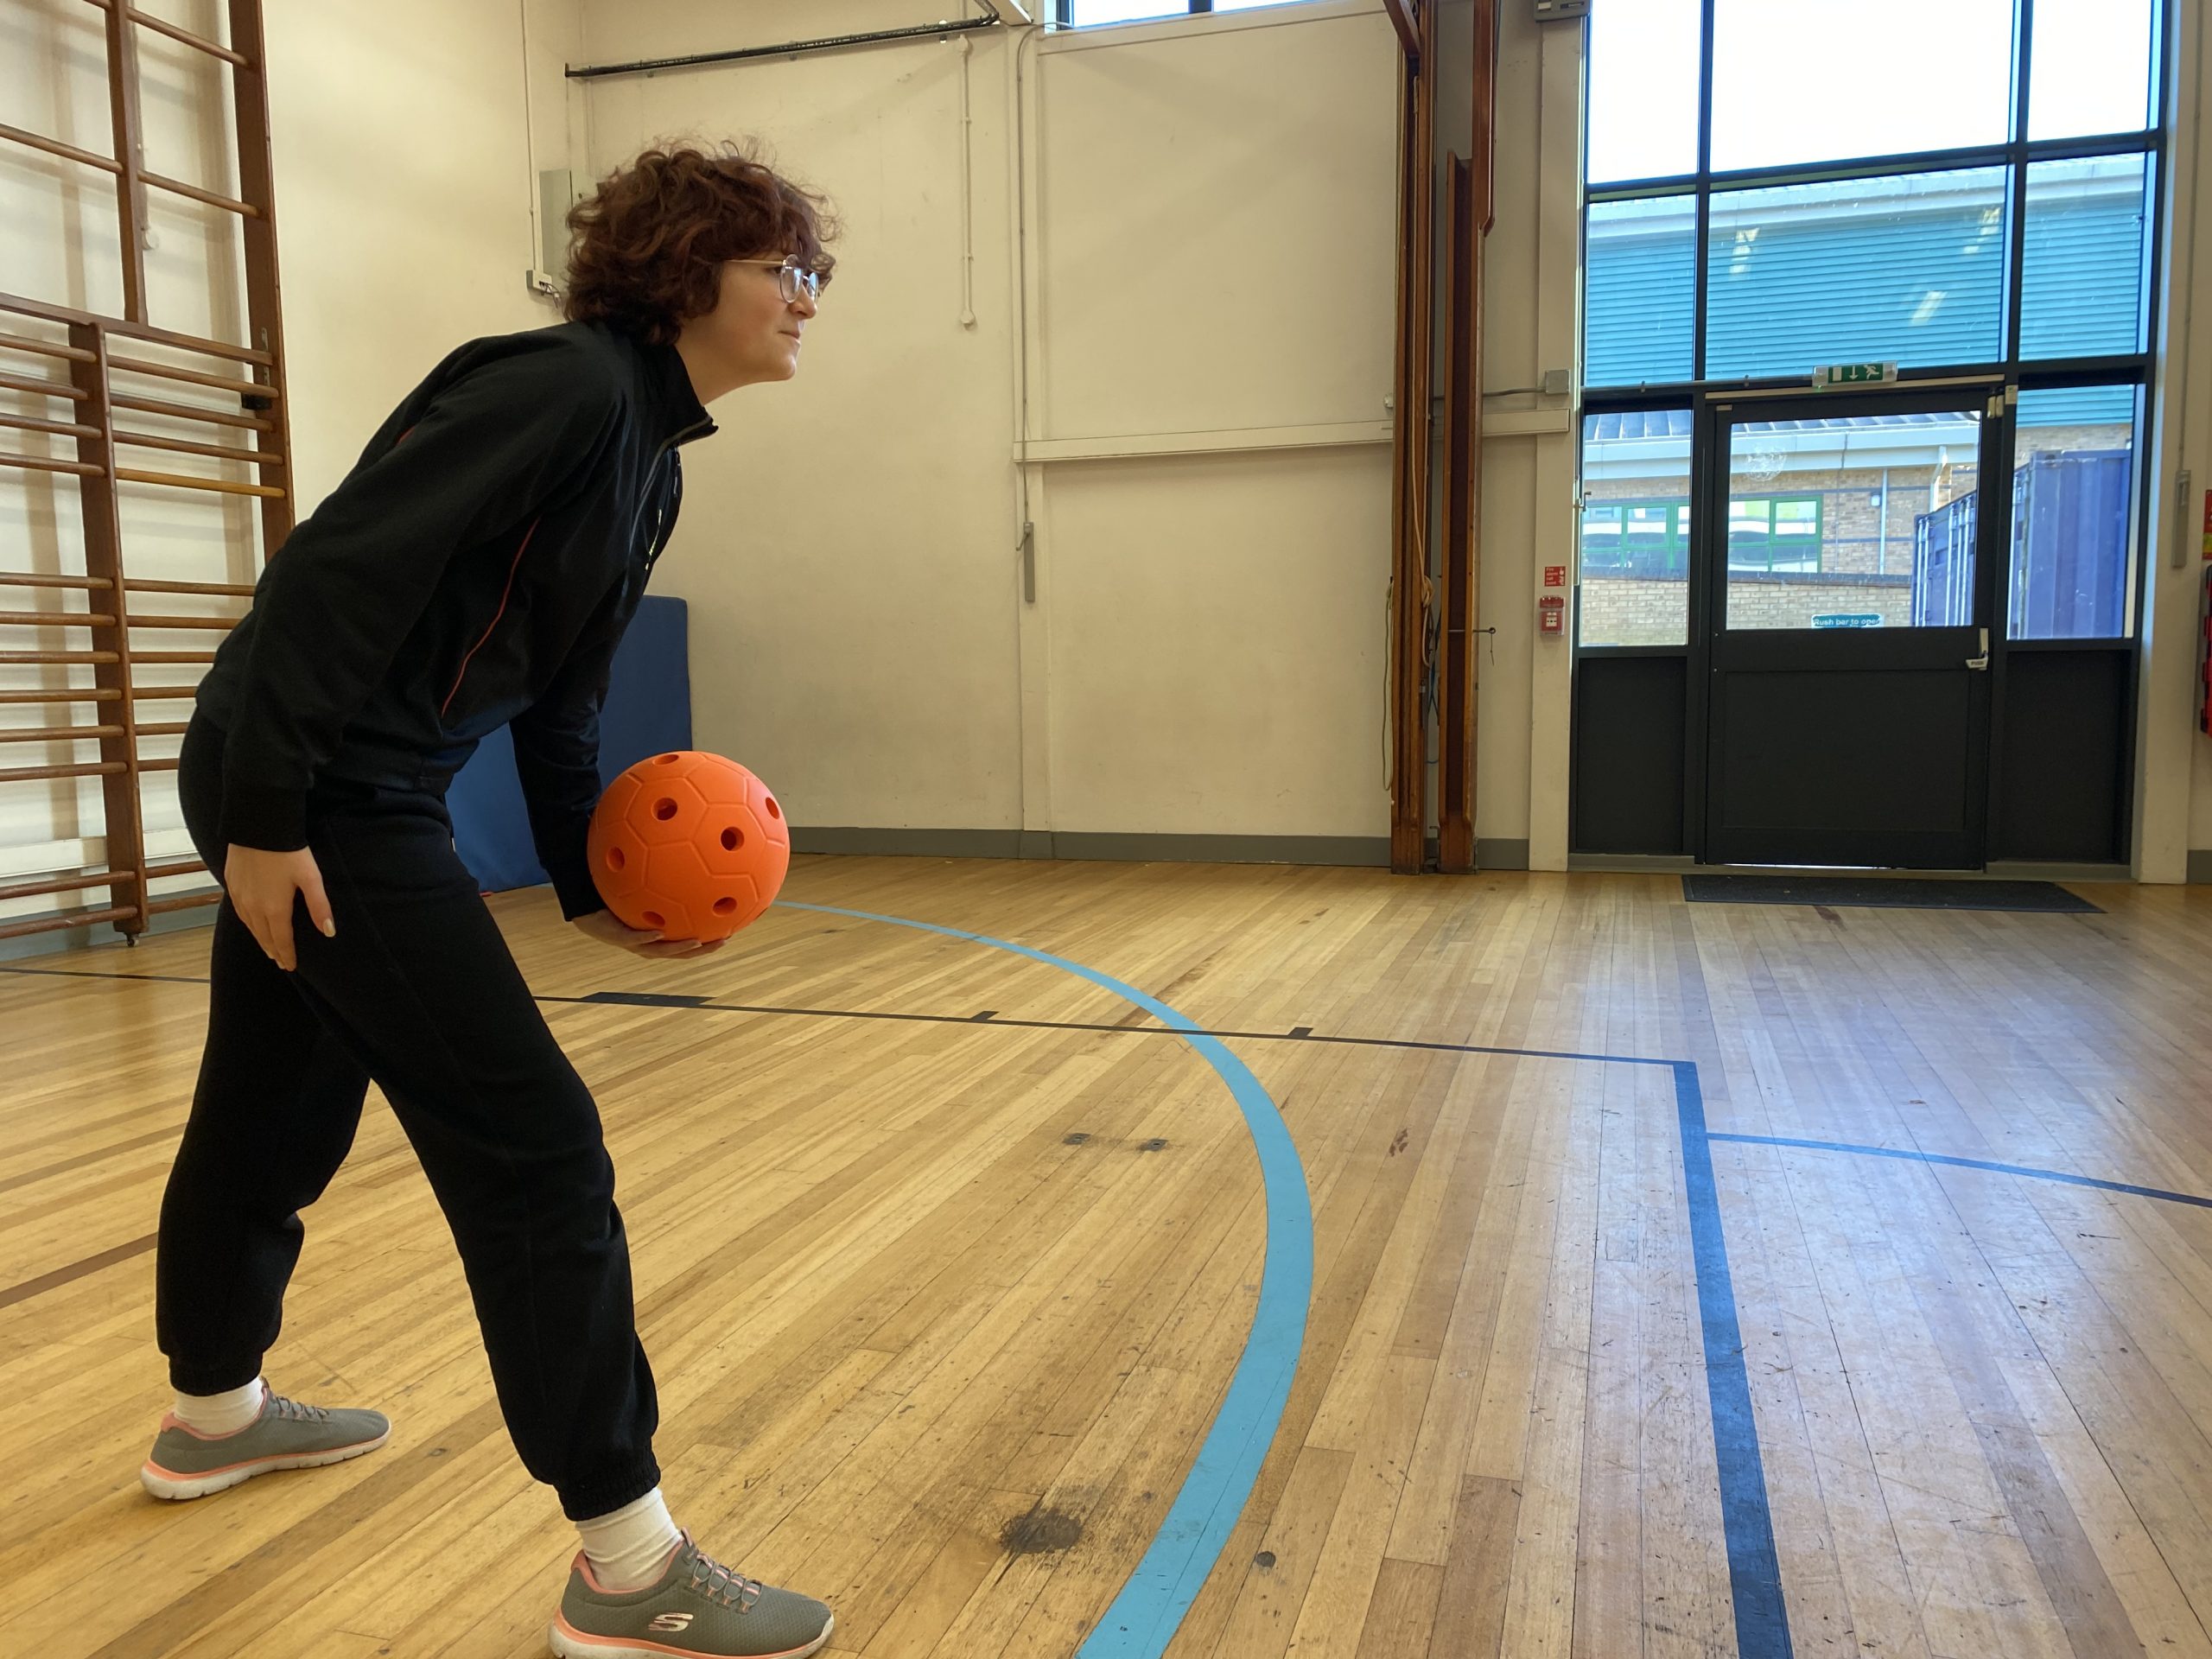 A slim dark haired woman gets ready to throw a junior goalball which is orange